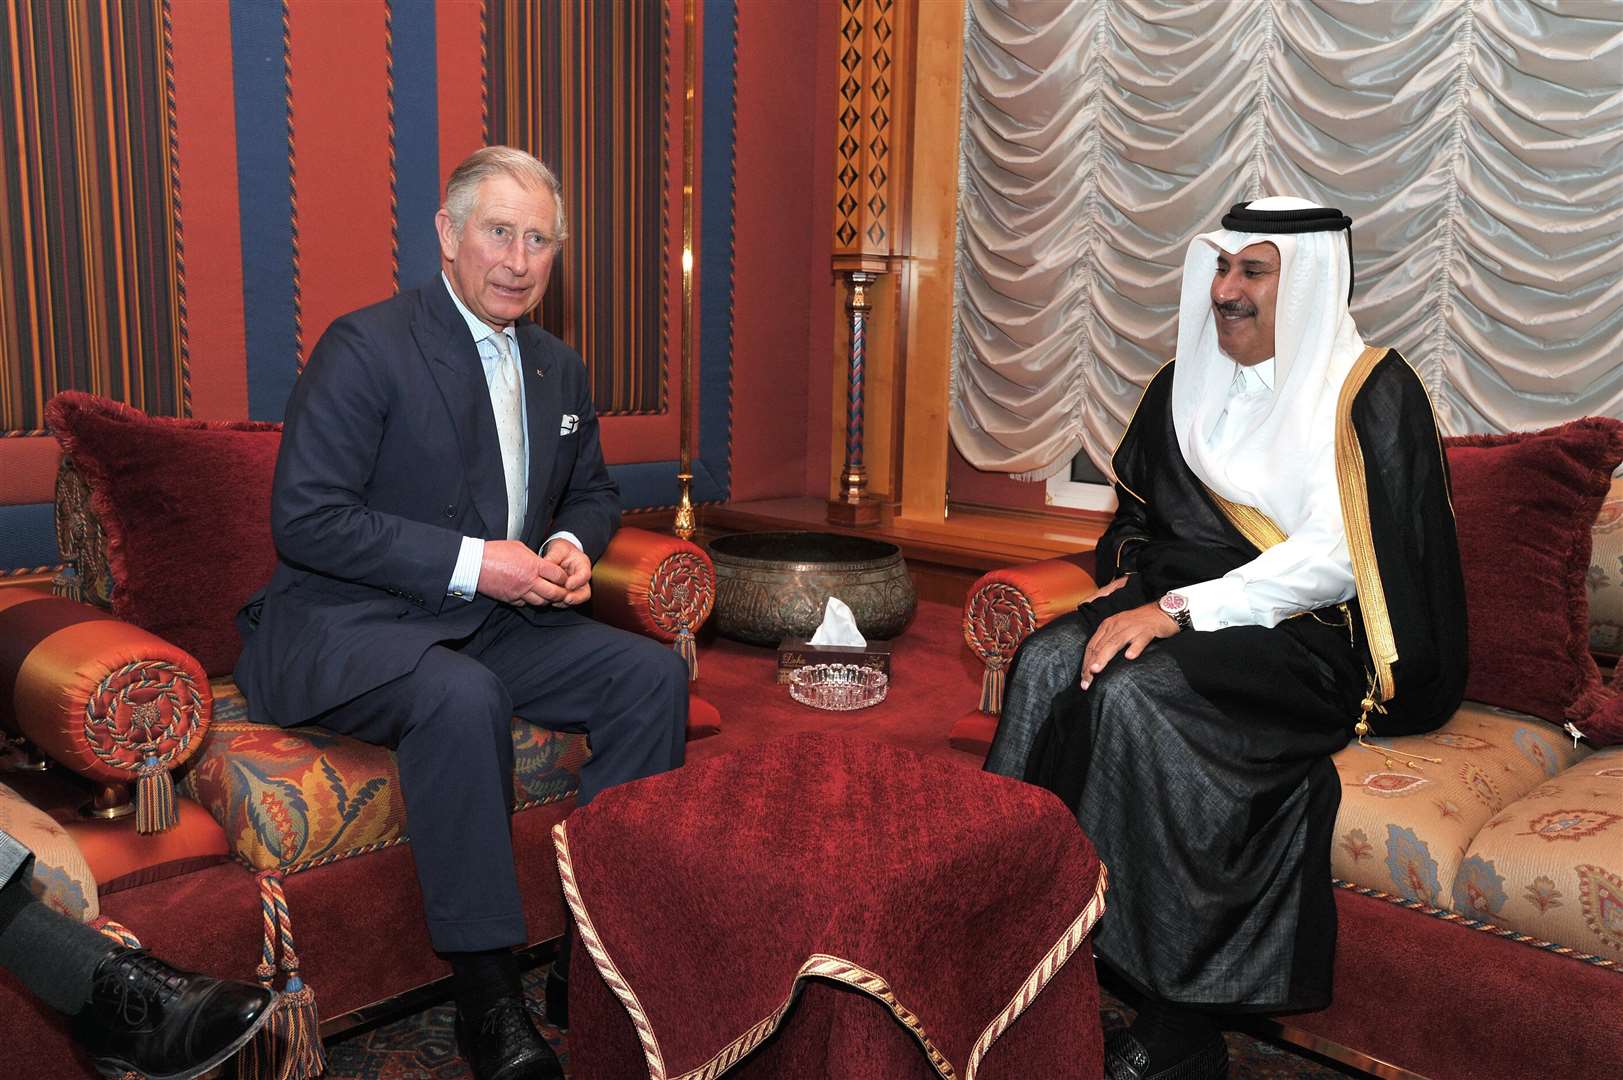 The Prince of Wales with the then Qatari prime minister Sheikh Hamad Bin Jassim in Doha in 2013 (PA)